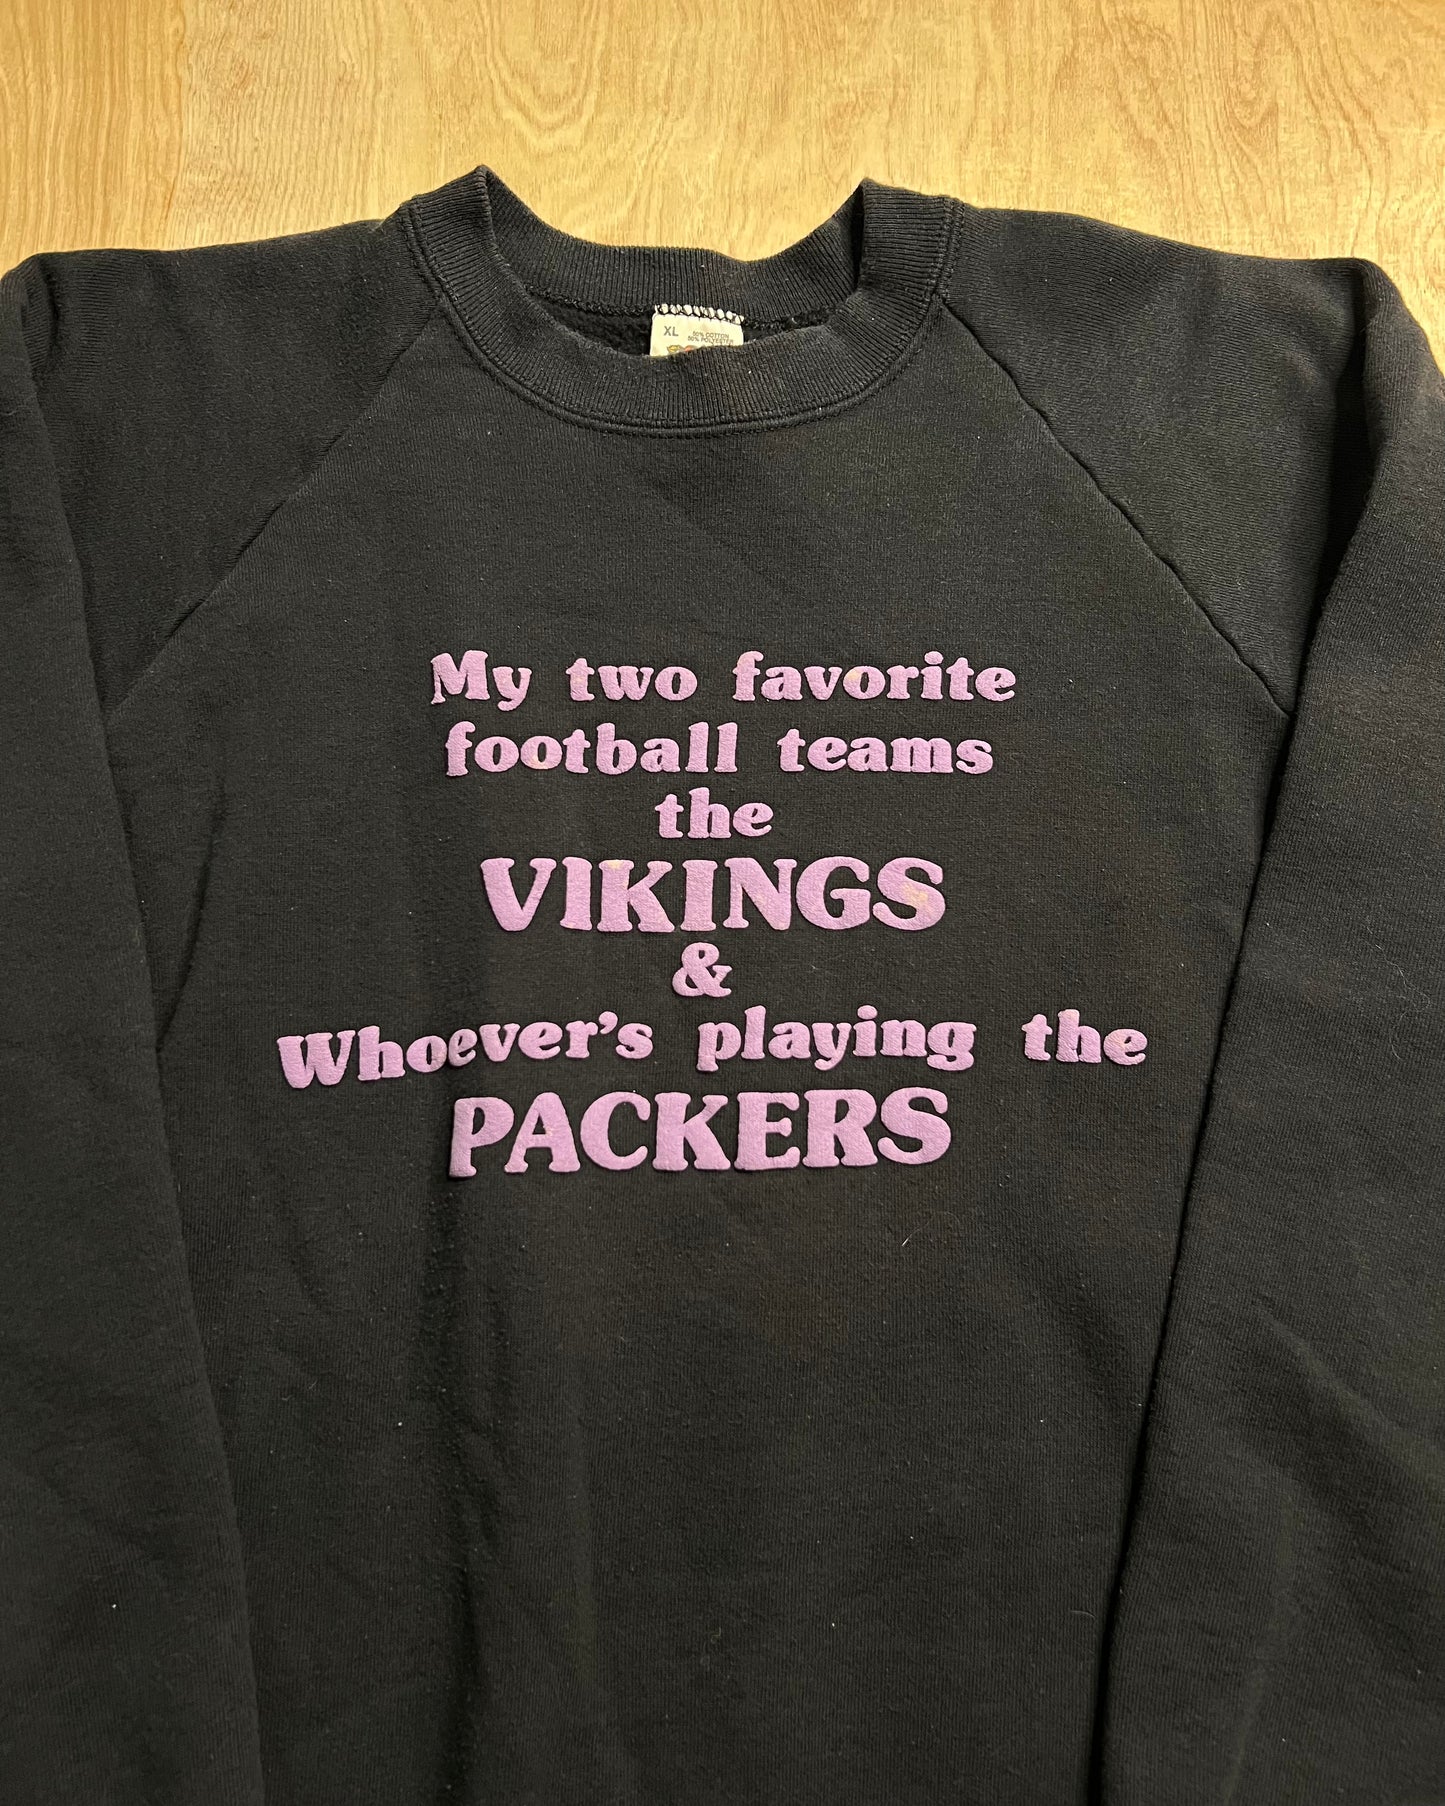 1990's "My Two Favorite Football Teams the Vikings & Whoever's Playing the Packers" Crewneck